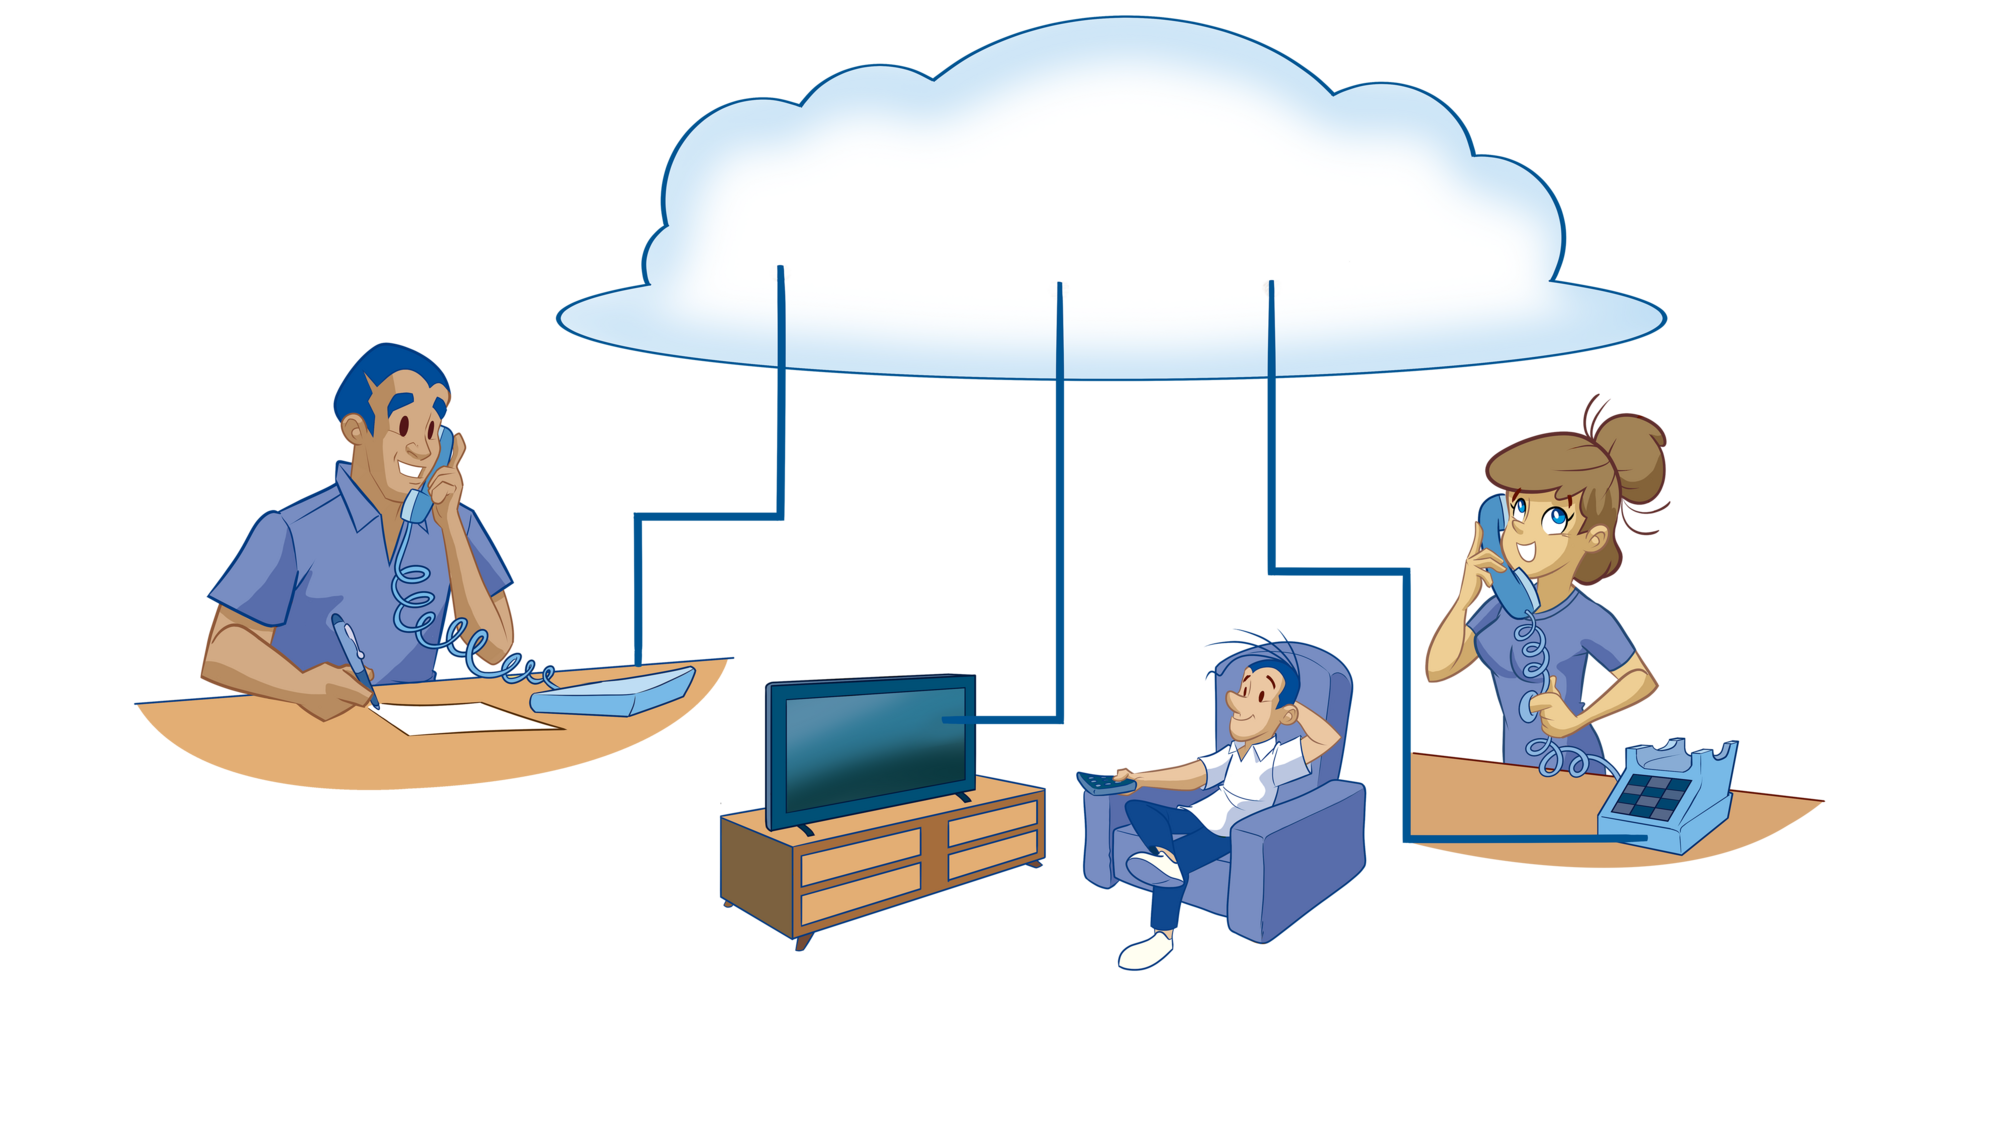 Two employees talking on the phone, third one watching TV, all connected to a cloud